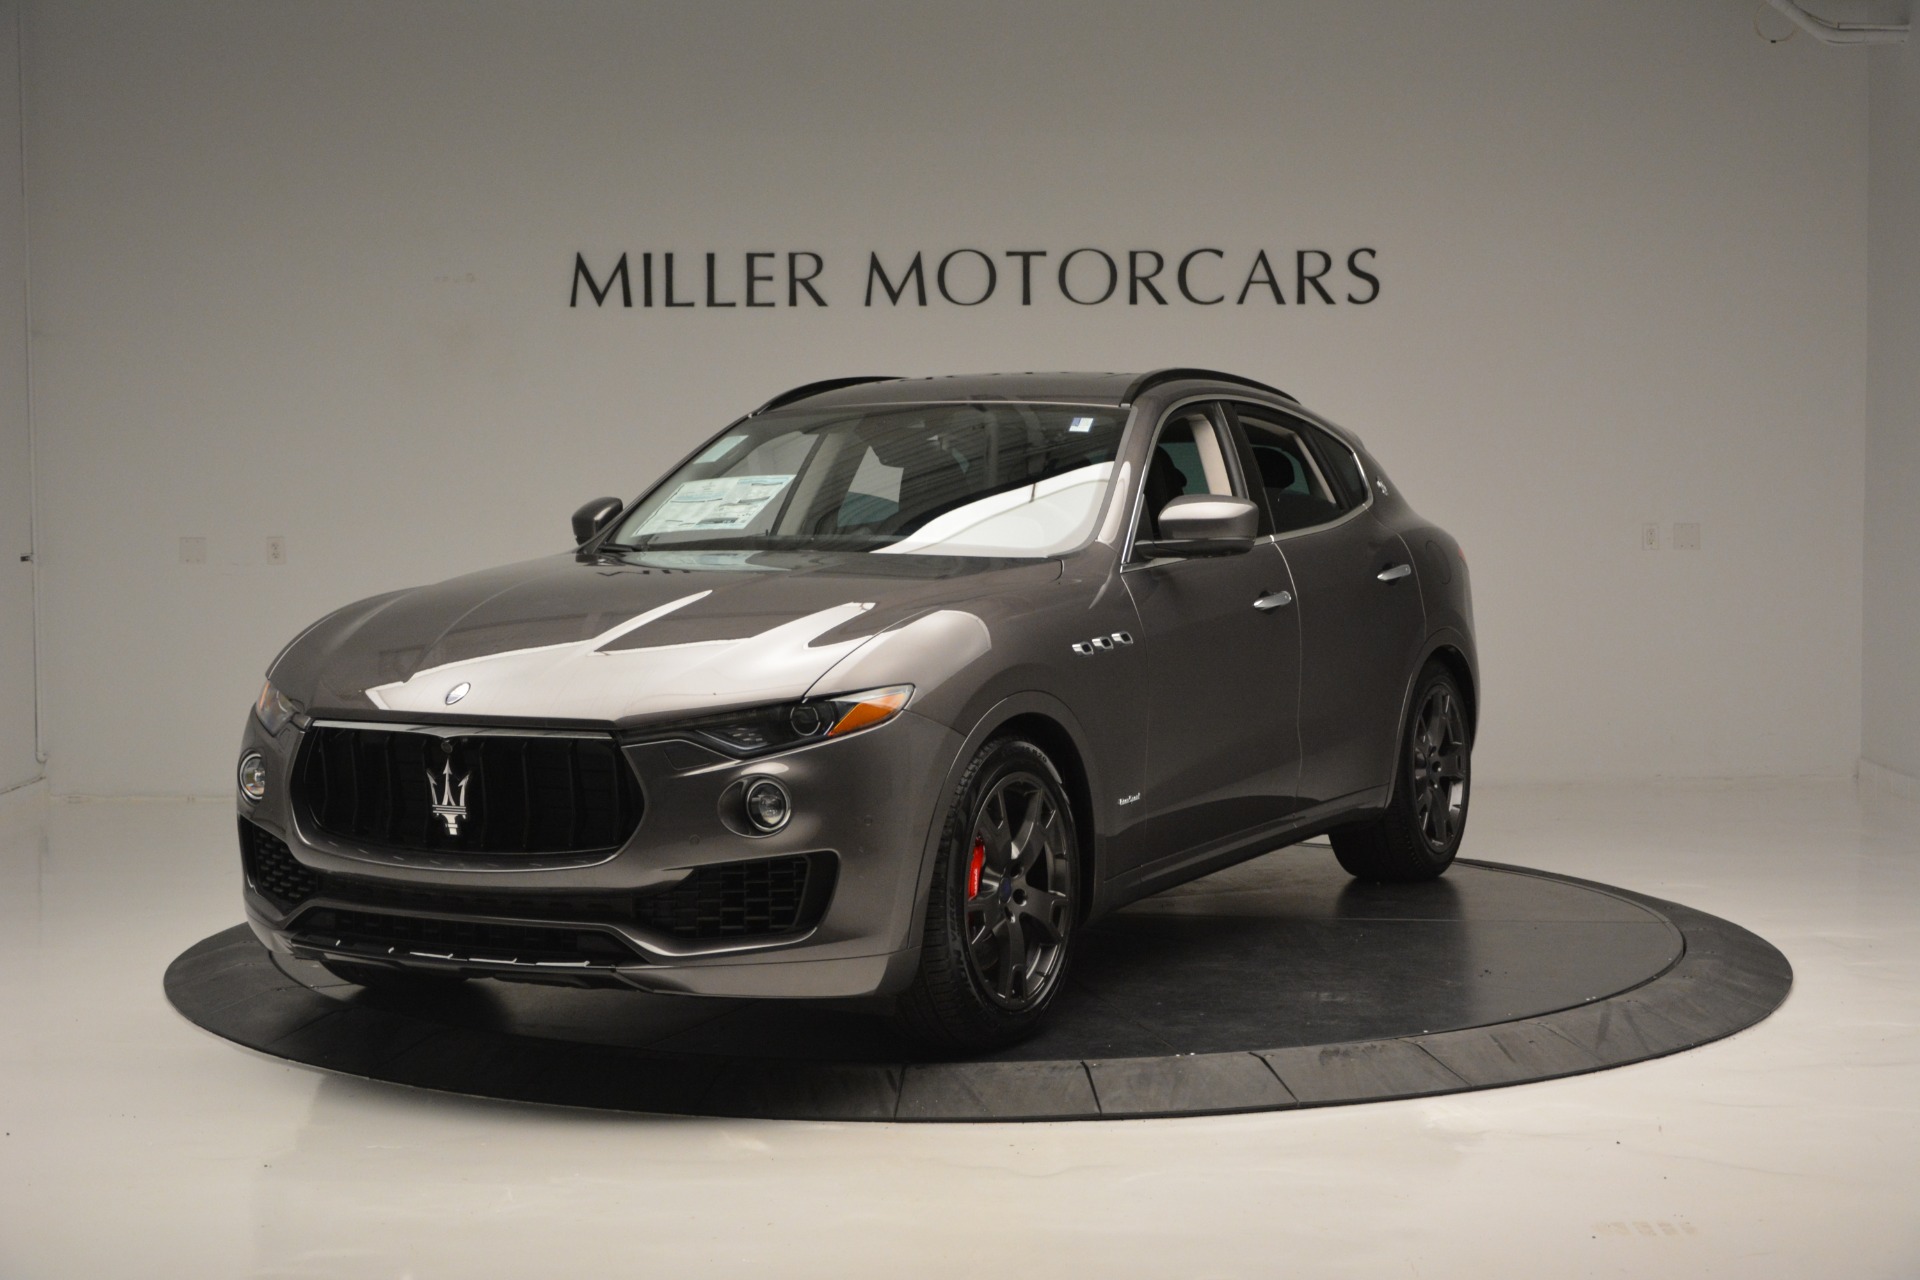 New 2018 Maserati Levante S Q4 GranSport for sale Sold at Rolls-Royce Motor Cars Greenwich in Greenwich CT 06830 1